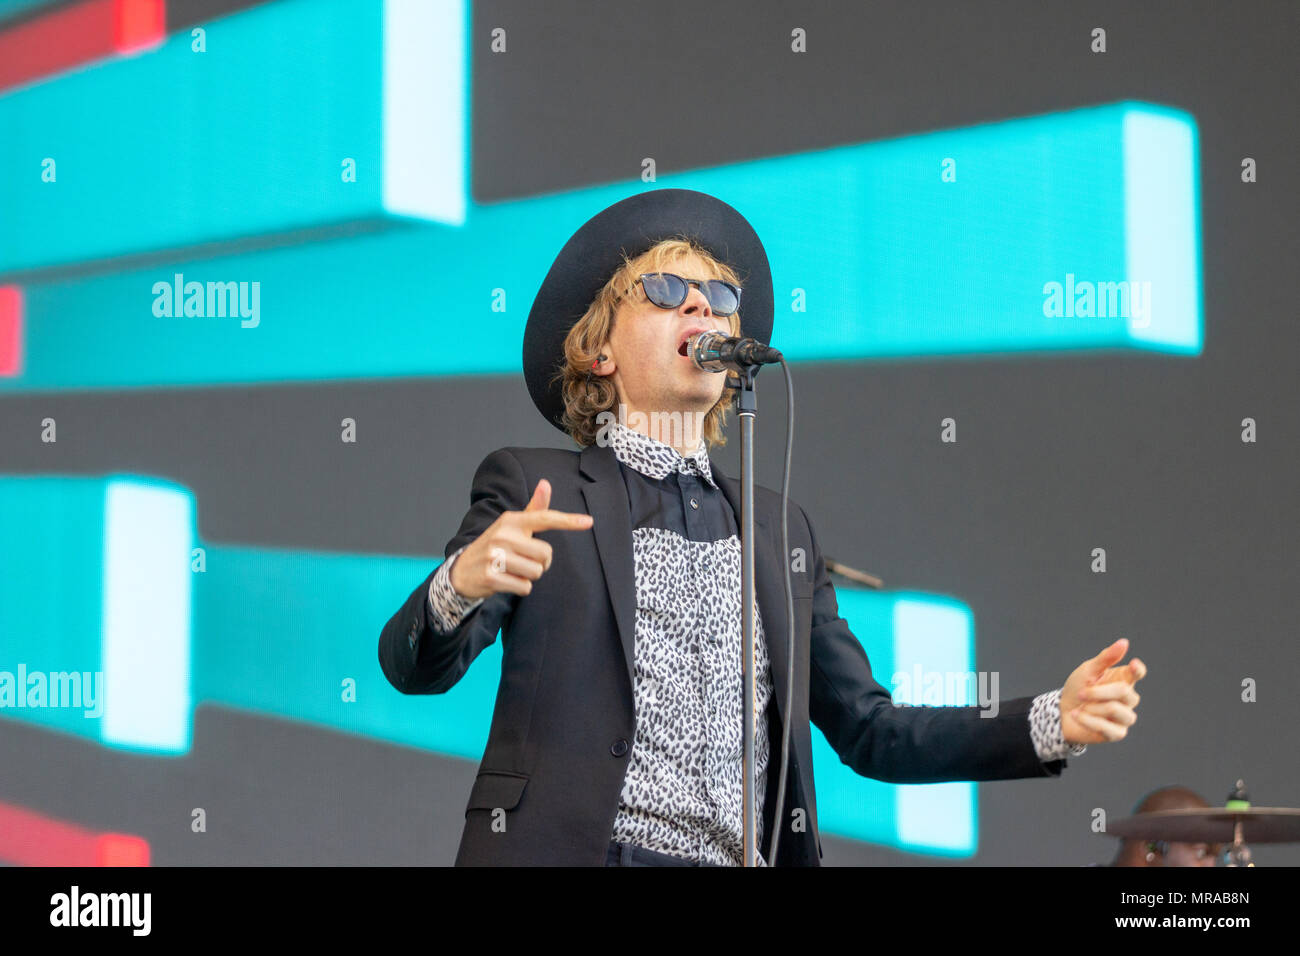 London, UK, 25 May 2018. Beck Hansen, known professionally as Beck, is an American singer, songwriter, rapper, record producer, and multi-instrumentalist. He is mostly known for his musical composition, as well as a palette of sonic genres. Credit: Darron Mark/Alamy Live News Stock Photo